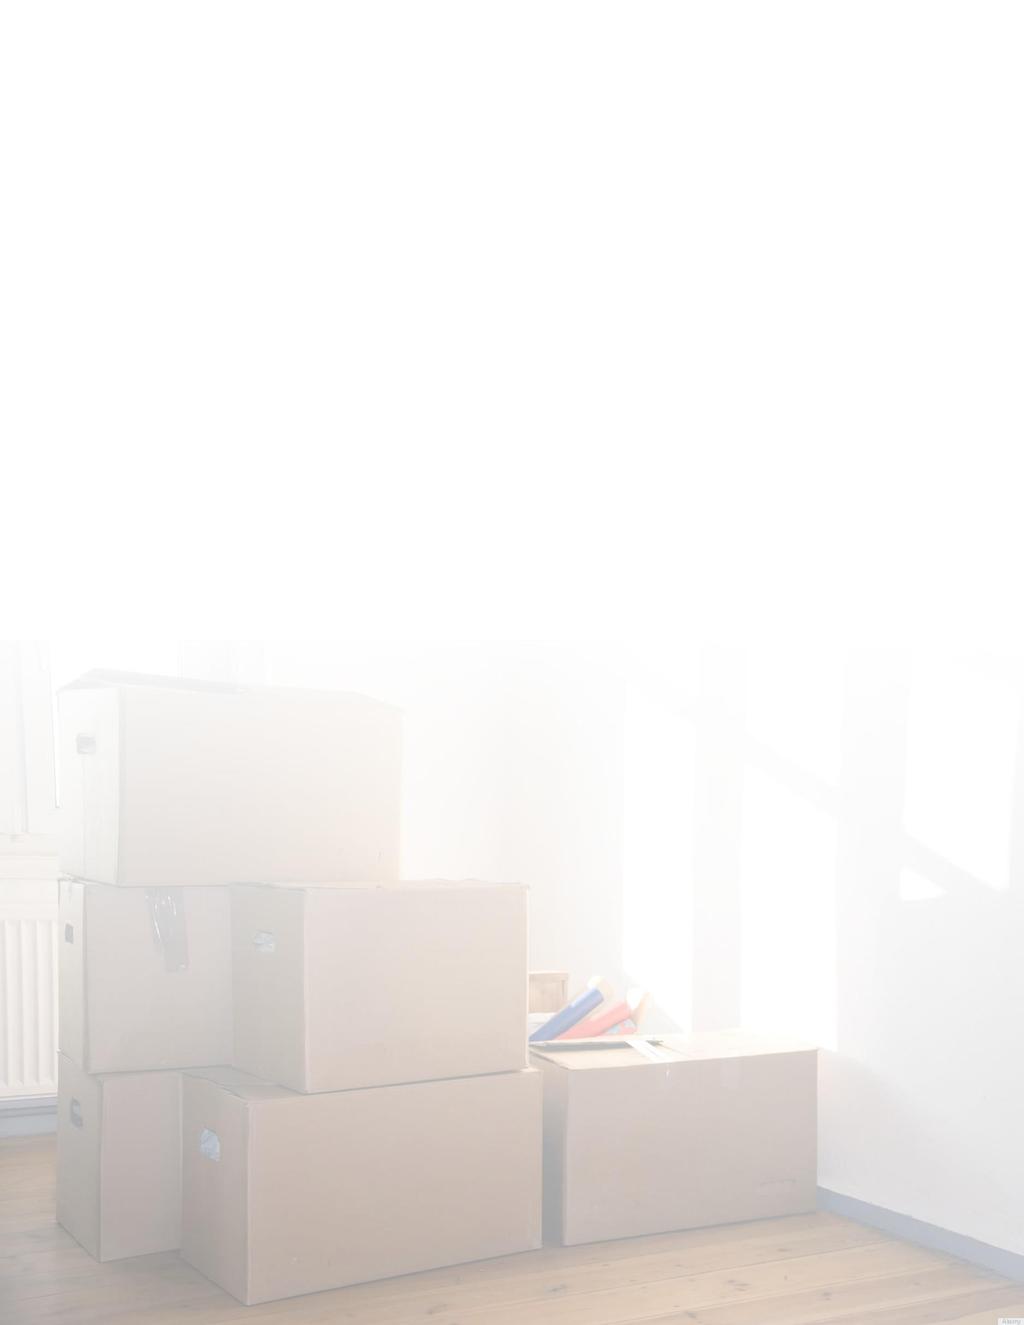 MOVE-OUT CLEANING CHECKLIST CLEANING REQUIREMENTS FOR VACATING TENANTS Everyday tenants just like you move out of their rental home without thinking about the potential fees that could be deducted